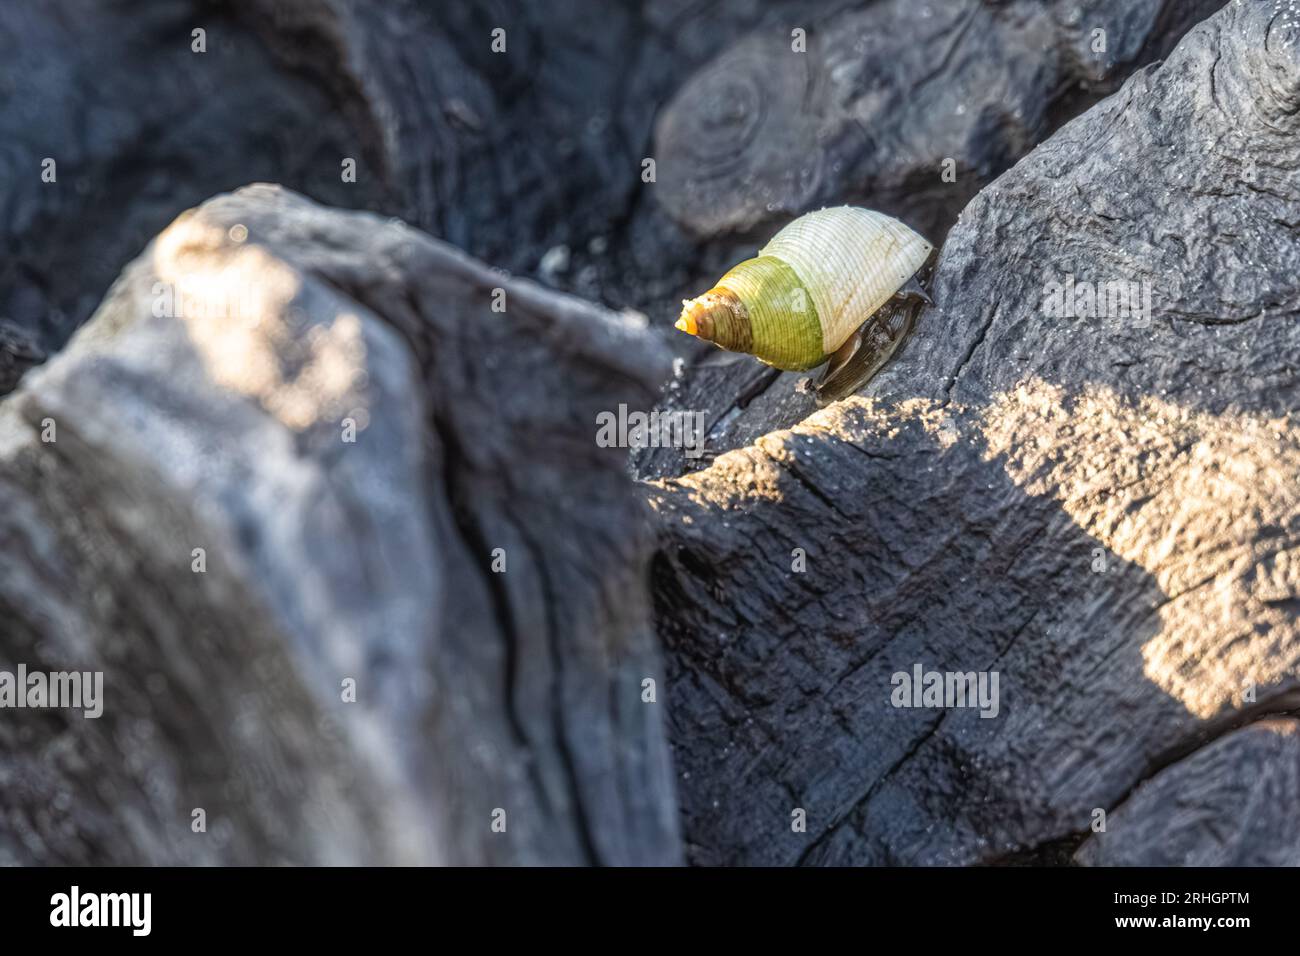 Sea snail with colorful shell on driftwood at Boneyard Beach on Big Talbot Island in Jacksonville, Florida. (USA) Stock Photo